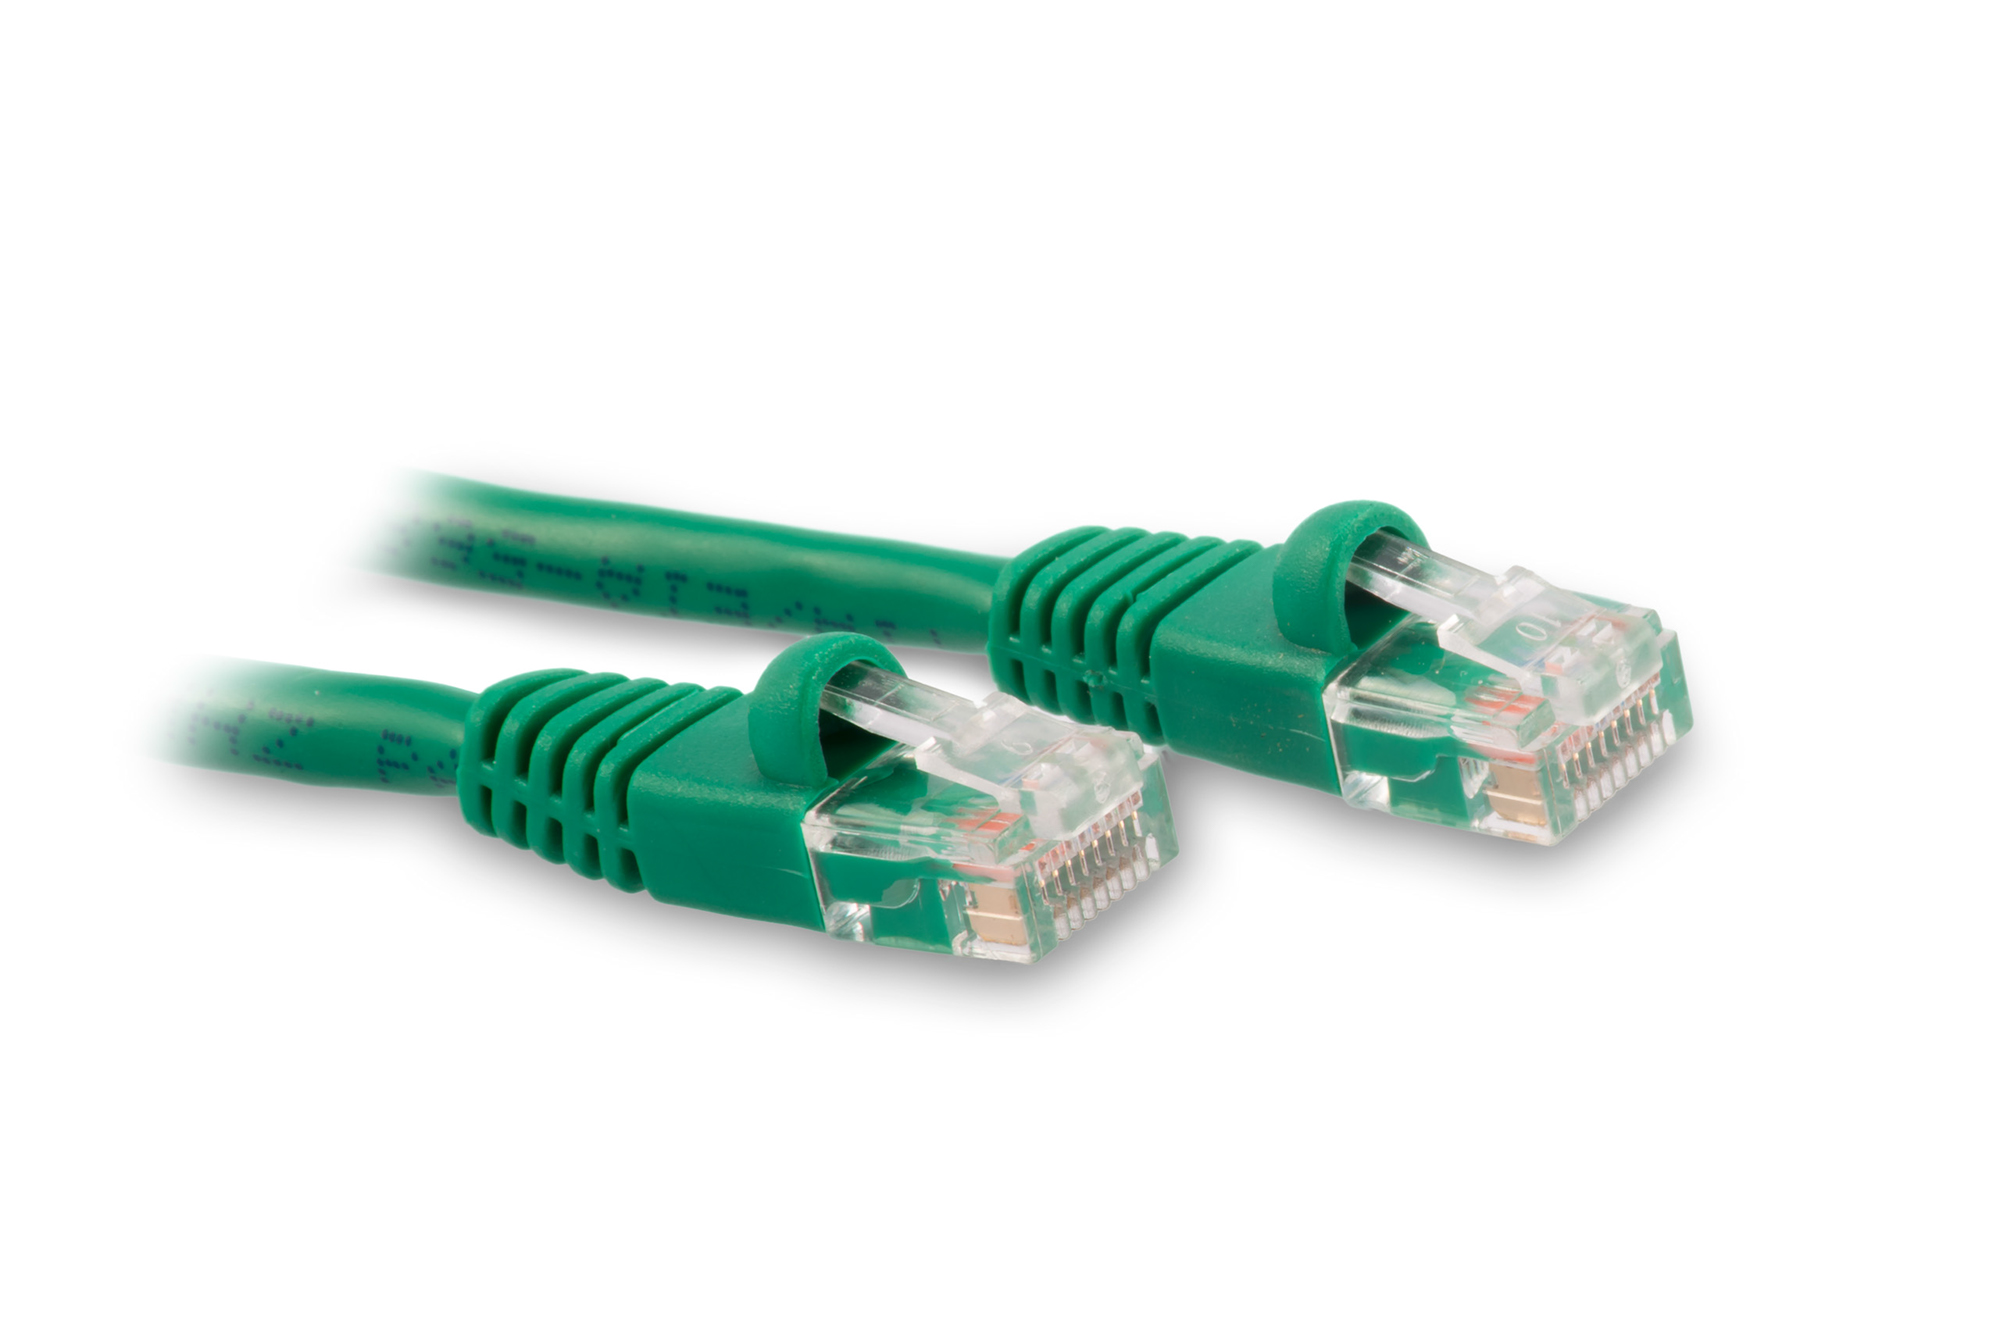 14ft Cat5e Ethernet Patch Cable - Green Color - Snagless Boot